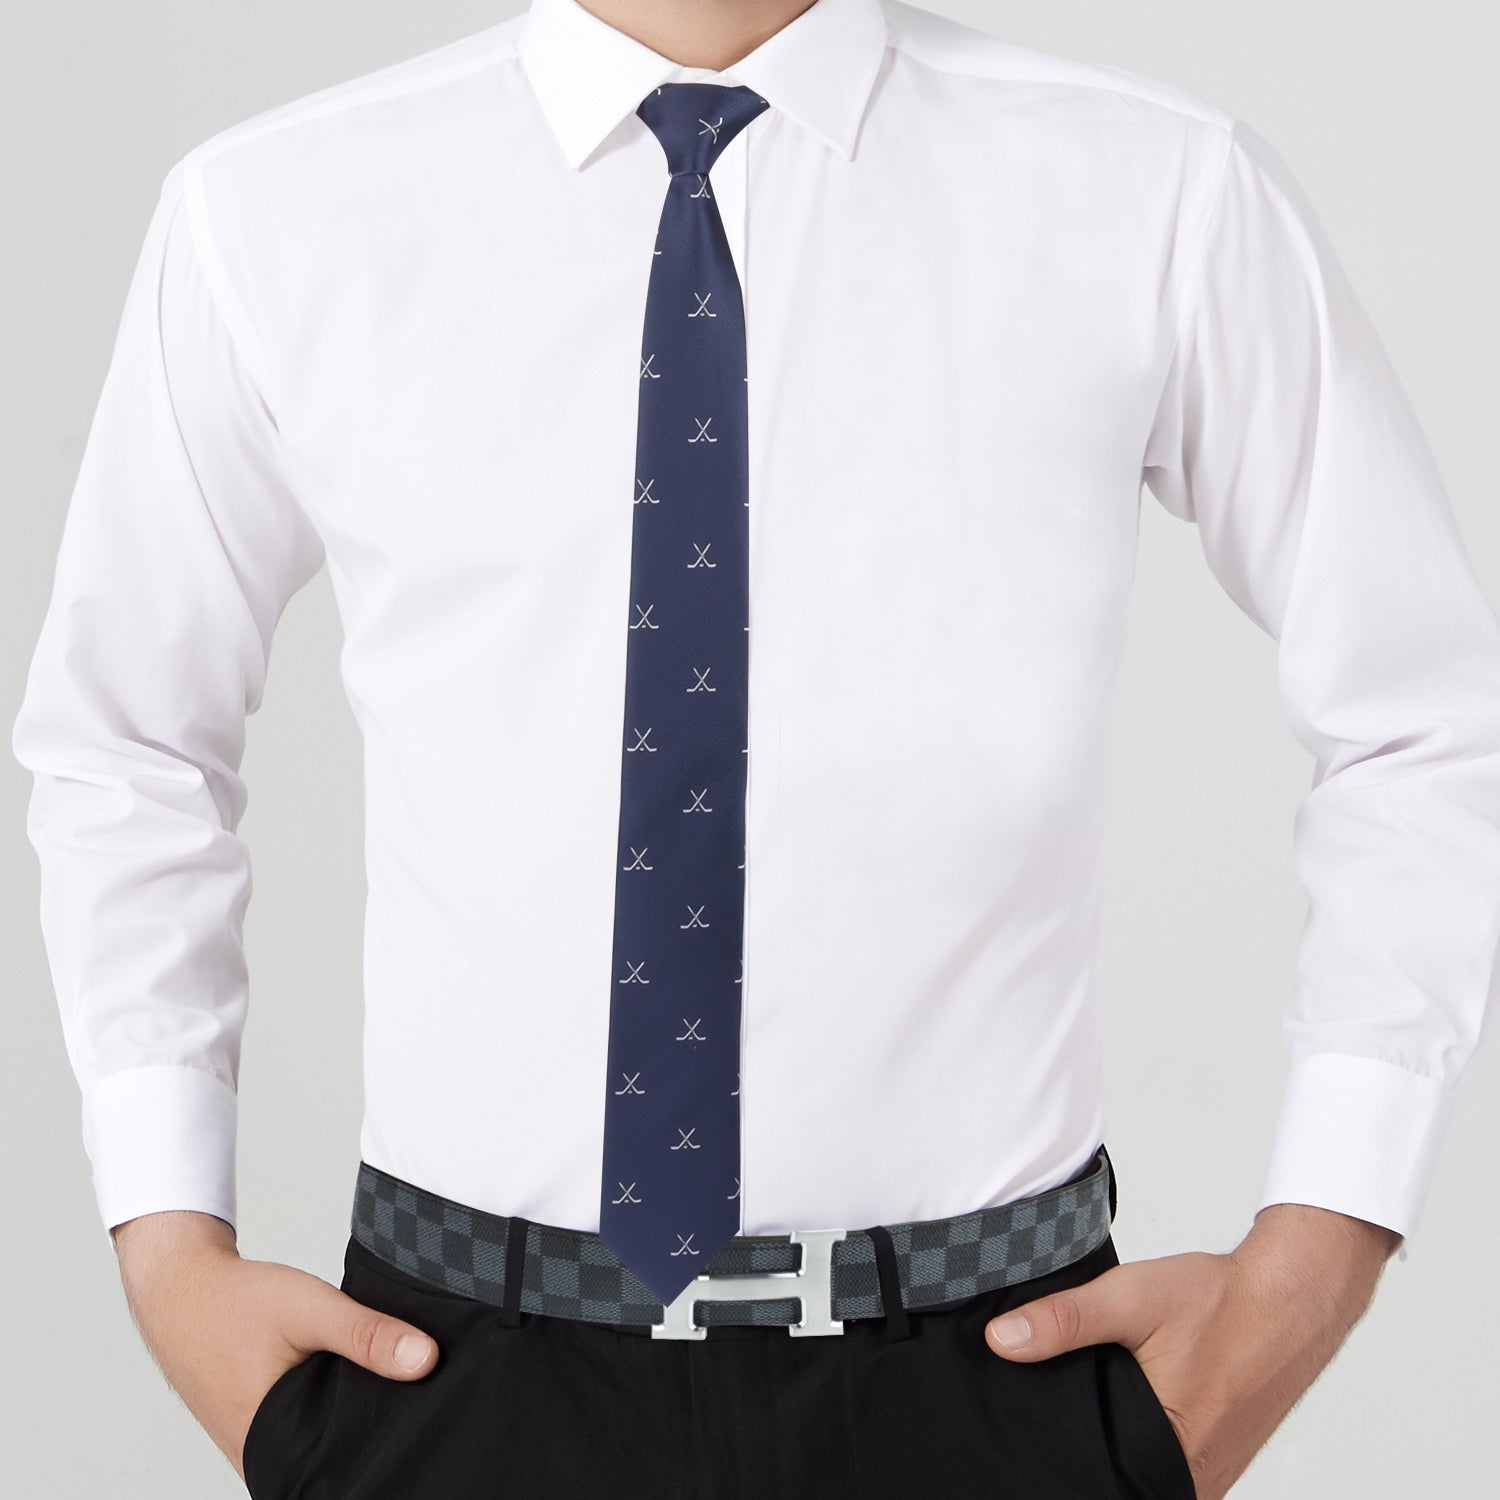 A man wearing a Crossed Ice Hockey Skinny Tie is oozing style points while sporting a white shirt.